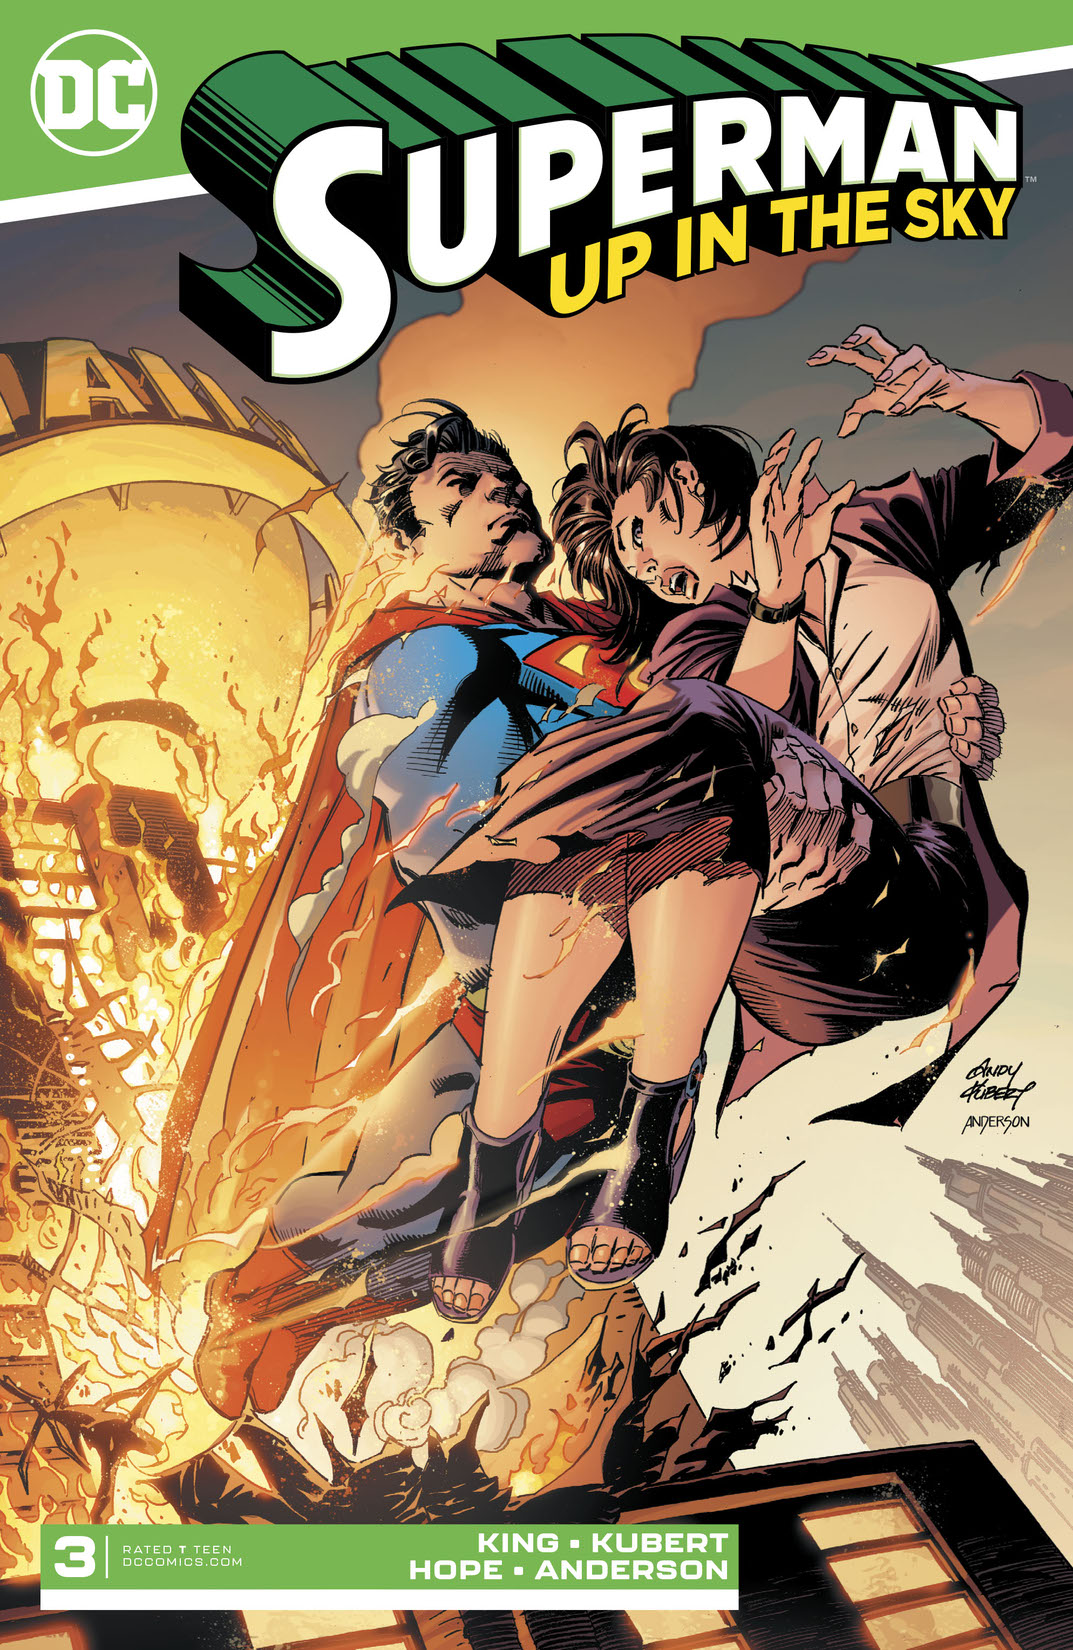 Superman: Up in the Sky #3 preview images